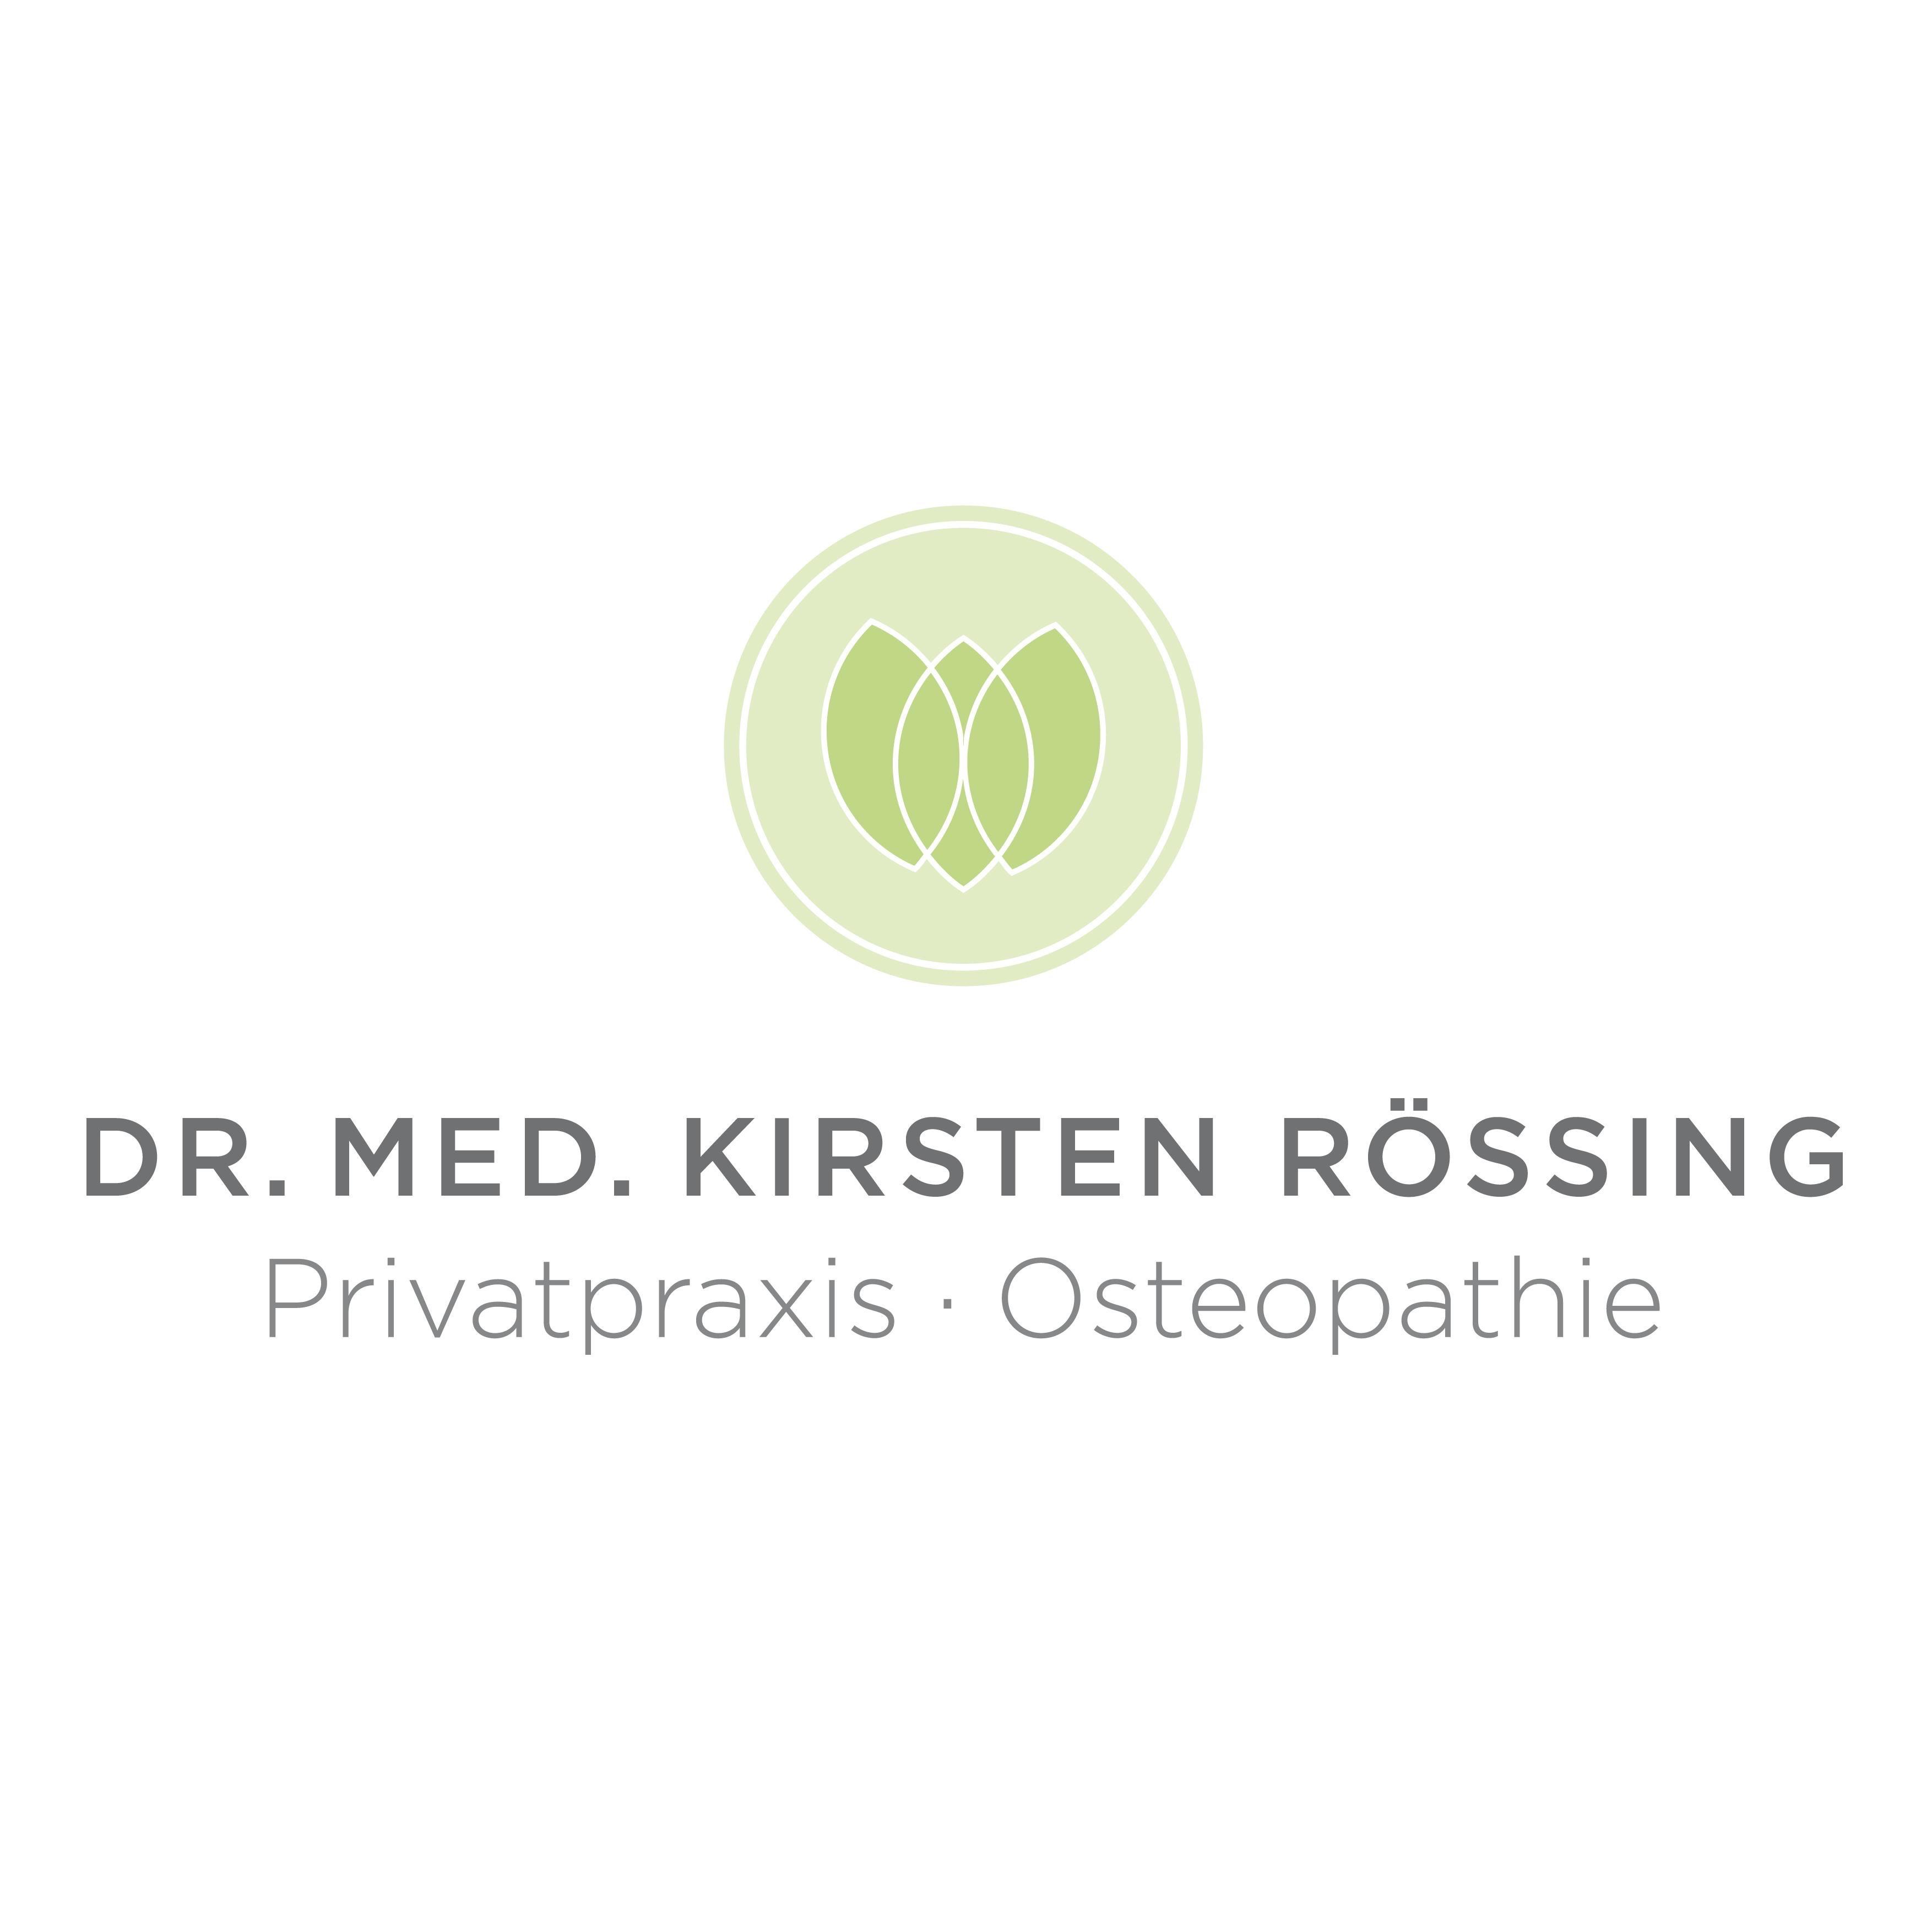 Dr. med. Kirsten Rössing Privatpraxis Osteopathie - Osteopath - Hannover - 0511 13229700 Germany | ShowMeLocal.com